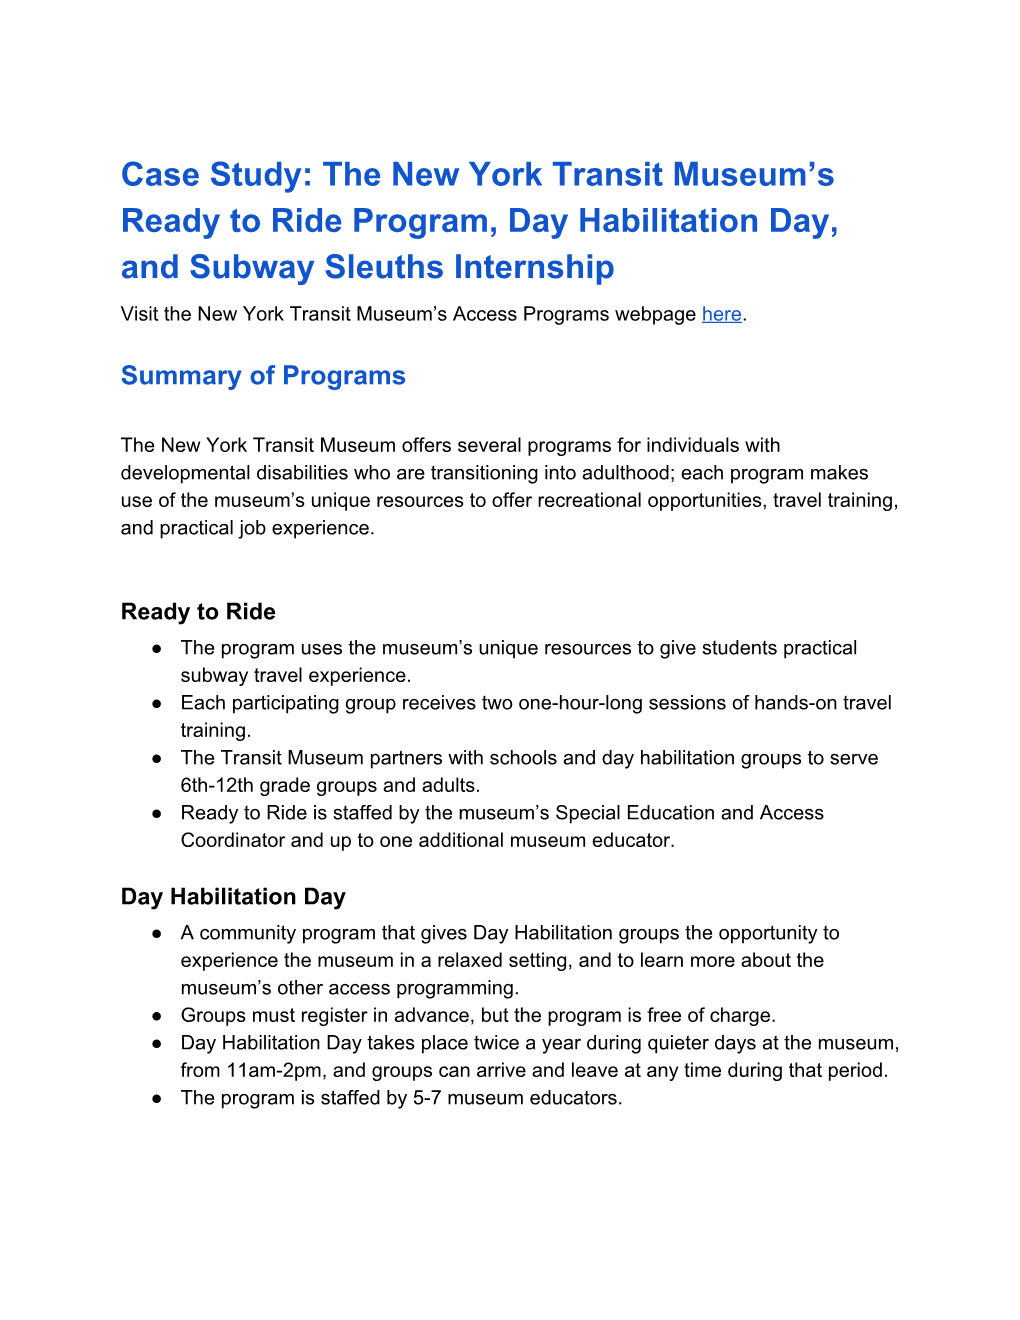 Case Study: the New York Transit Museum's Ready to Ride Program, Day Habilitation Day, and Subway Sleuths Internship